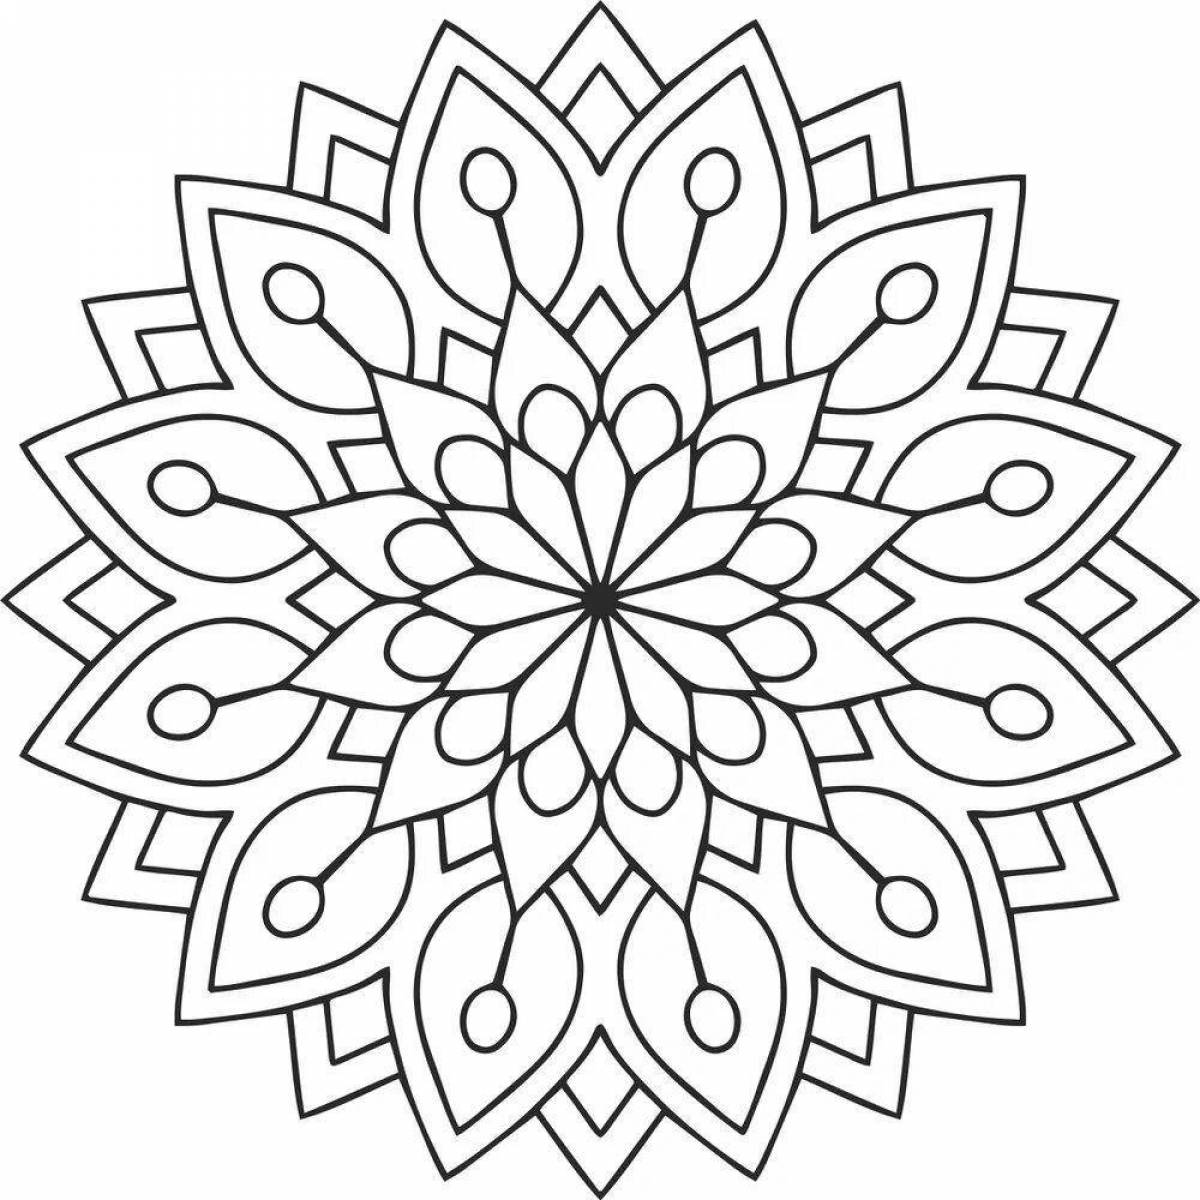 Exquisite light pattern coloring book